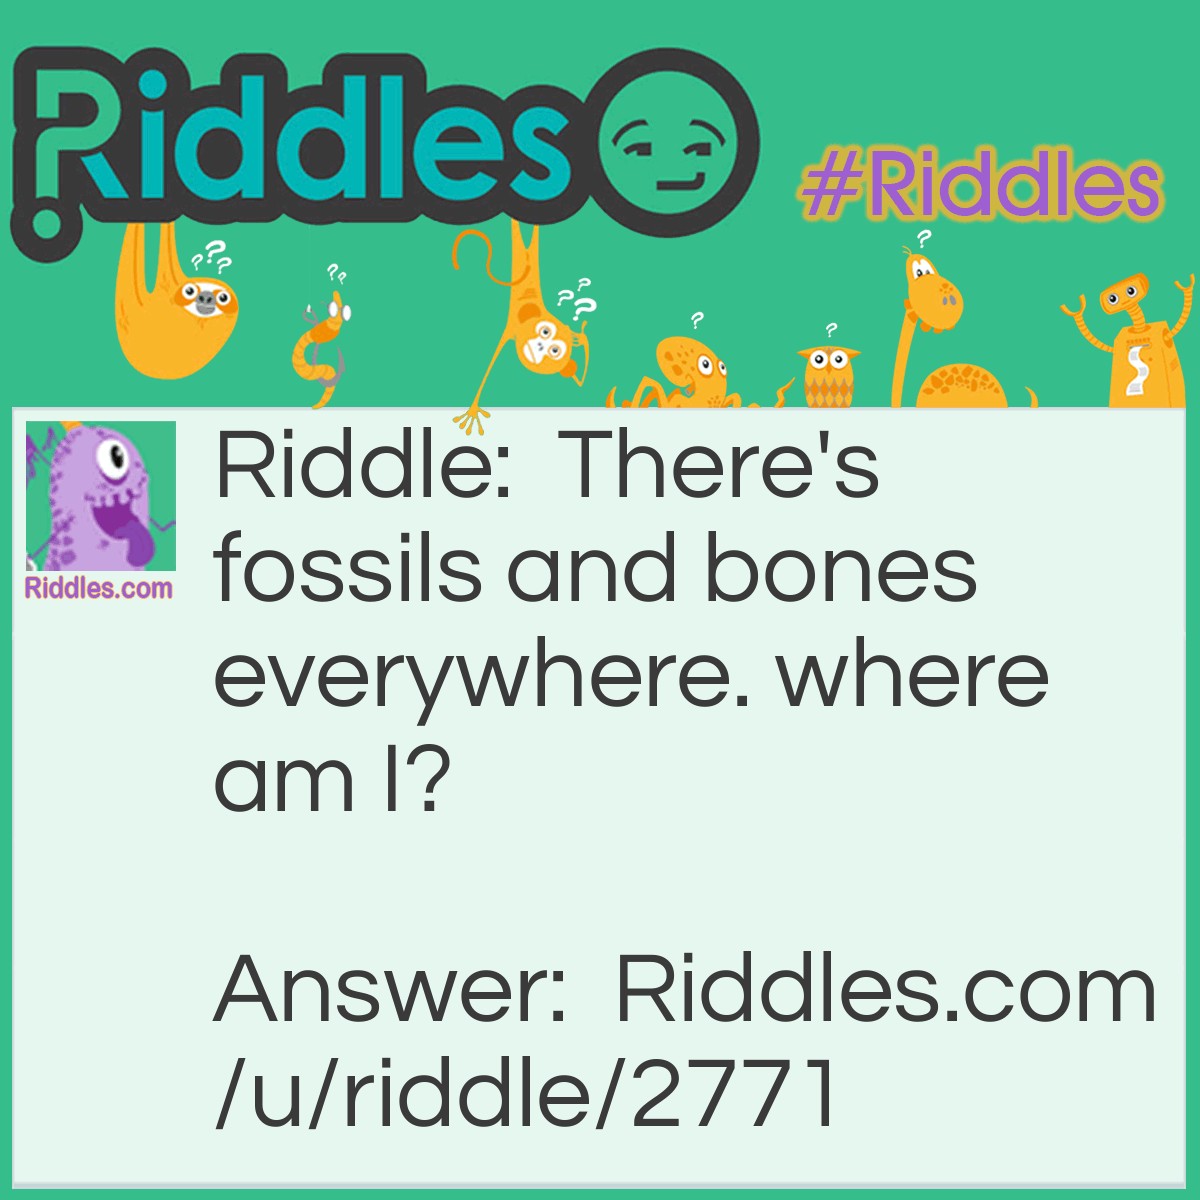 Riddle: There's fossils and bones everywhere. where am I? Answer: A dinosaur place.